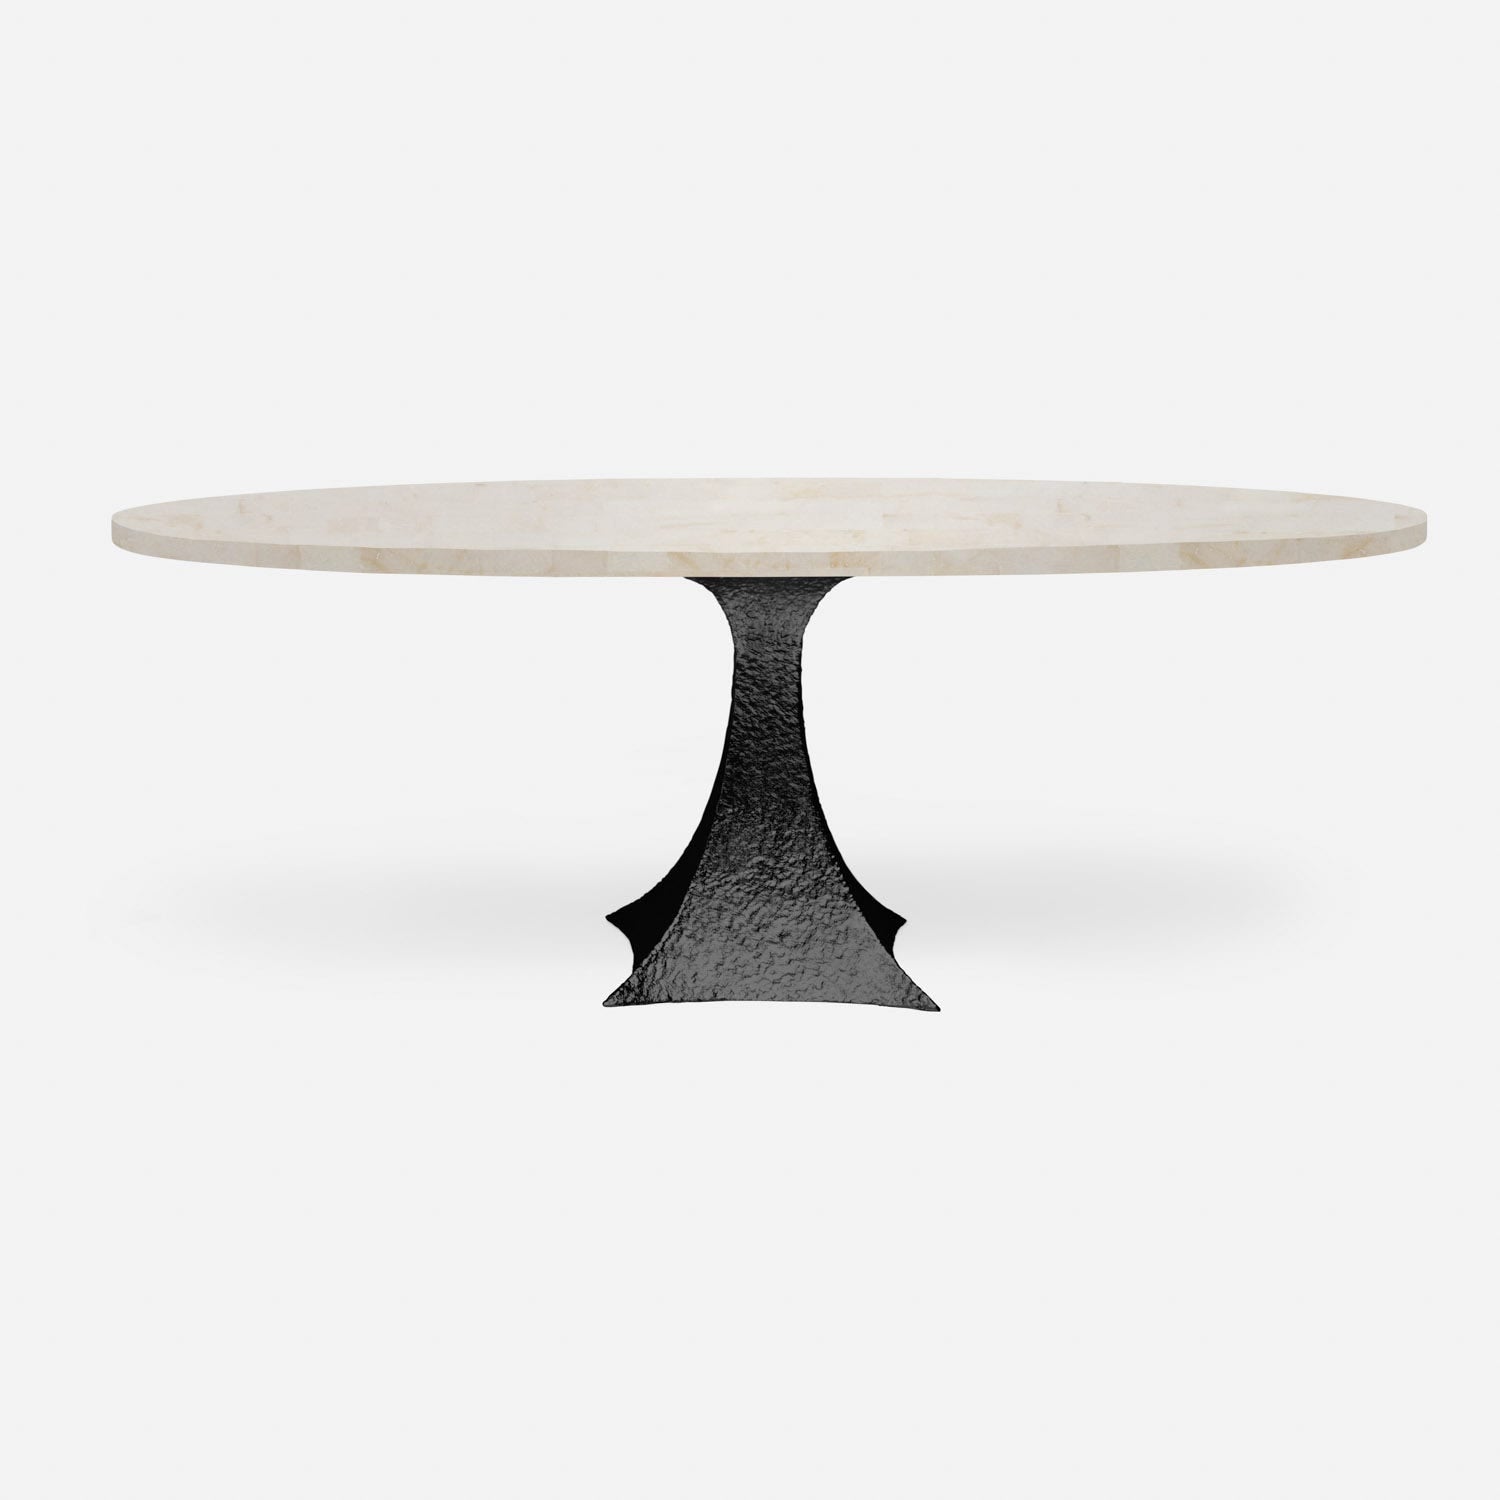 Made Goods Noor 96" x 44" x 30" Double Base Bumpy Black Iron Dinning Table With Oval Ice Crystal Stone Table Top